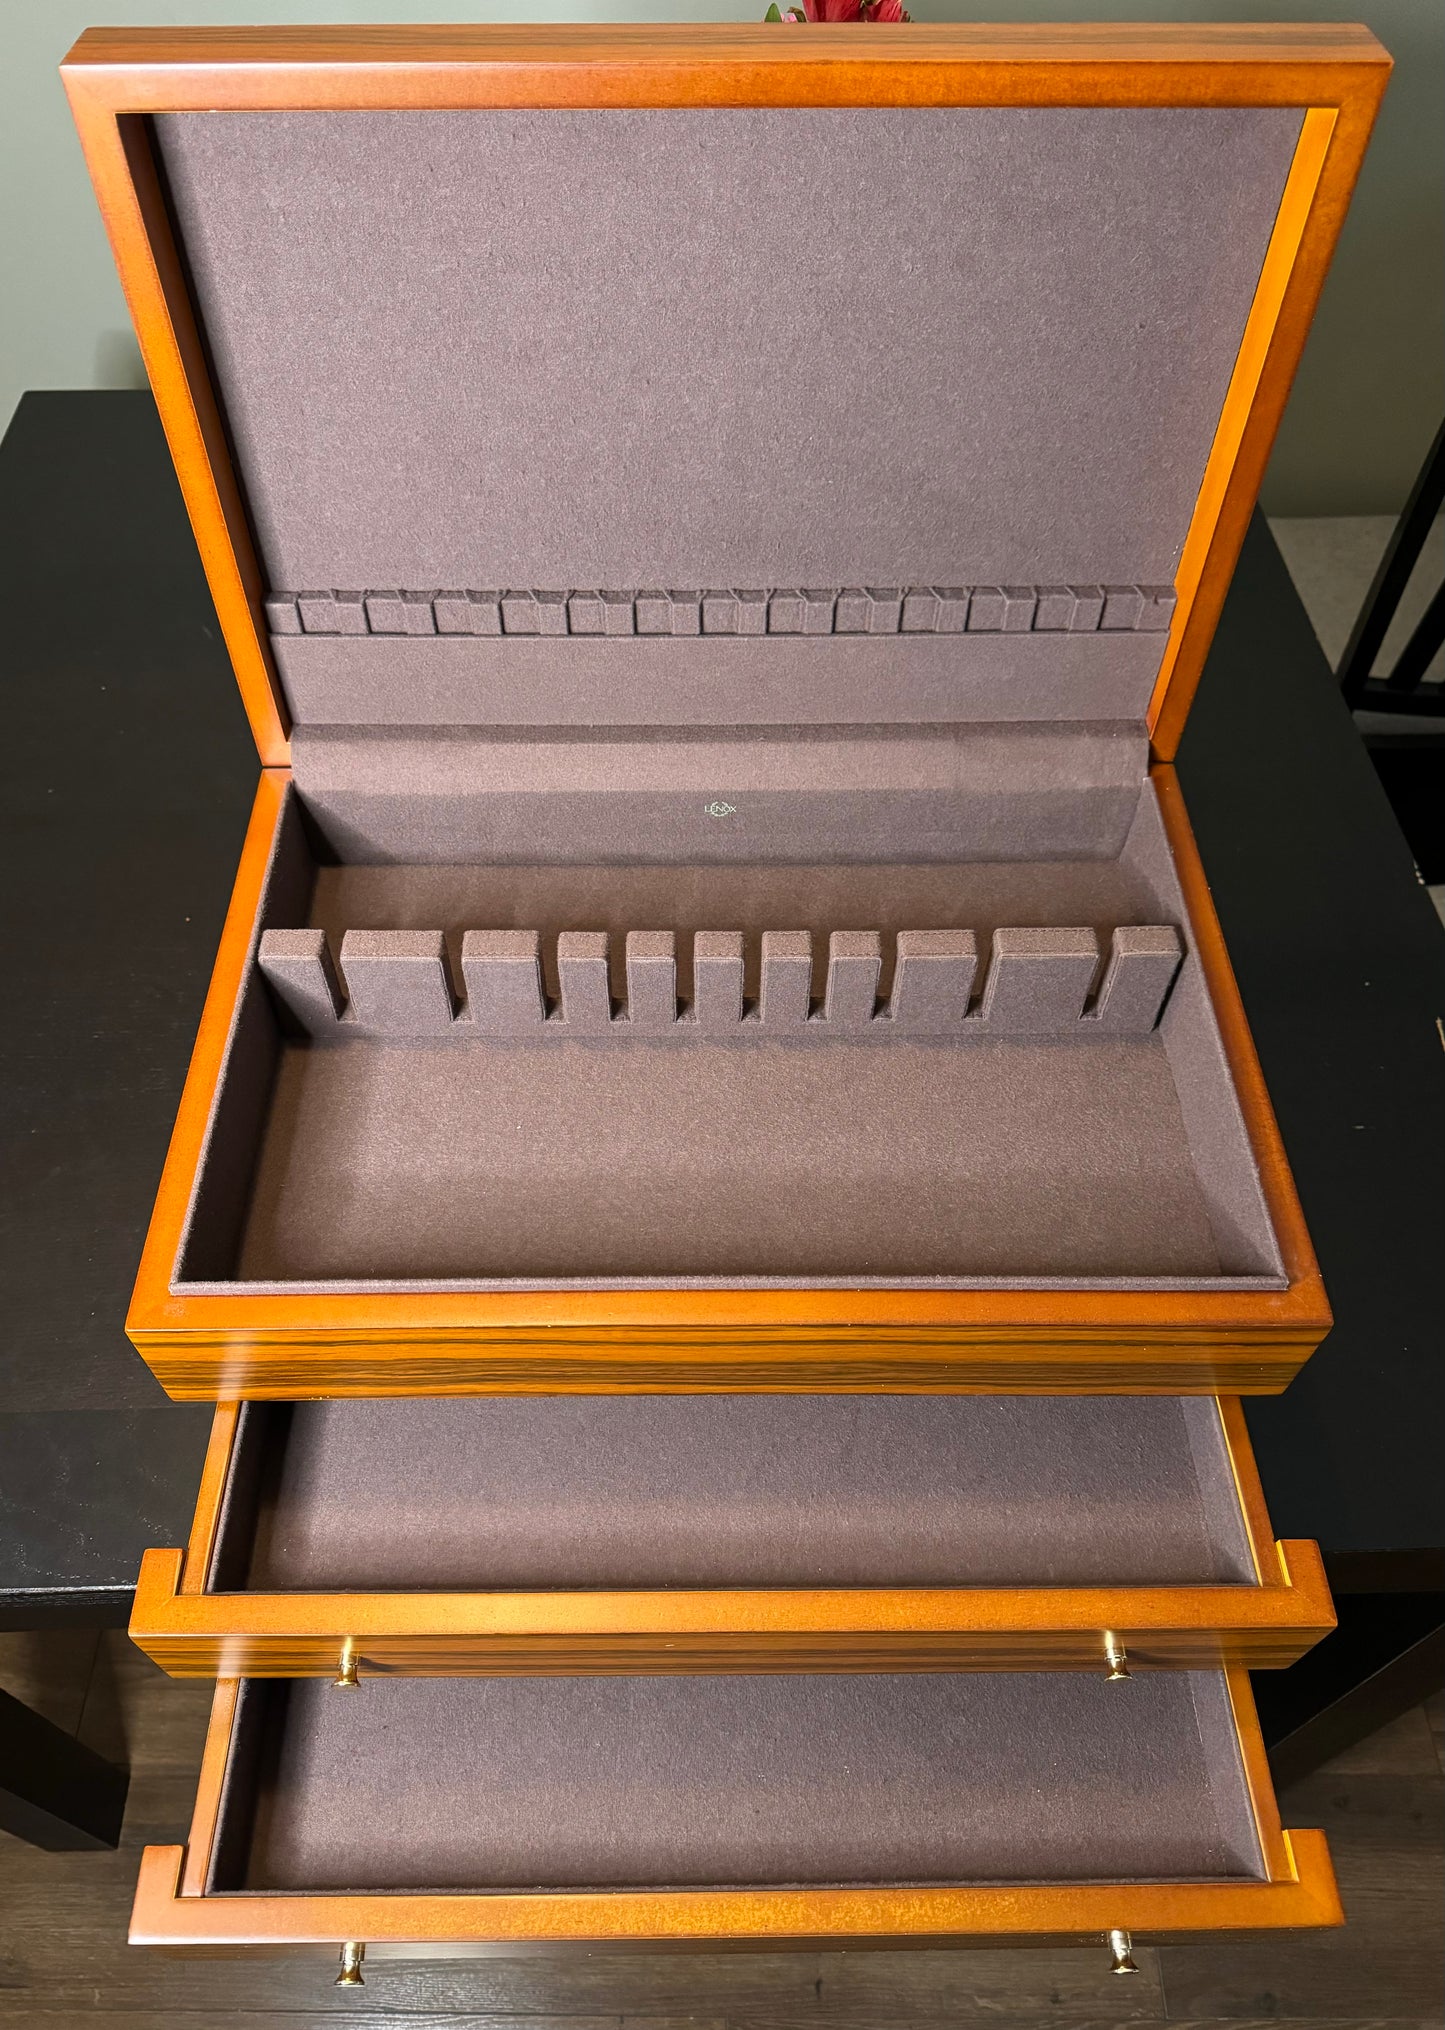 Lenox Rosewood Flatware Chest | Holds Service for 24